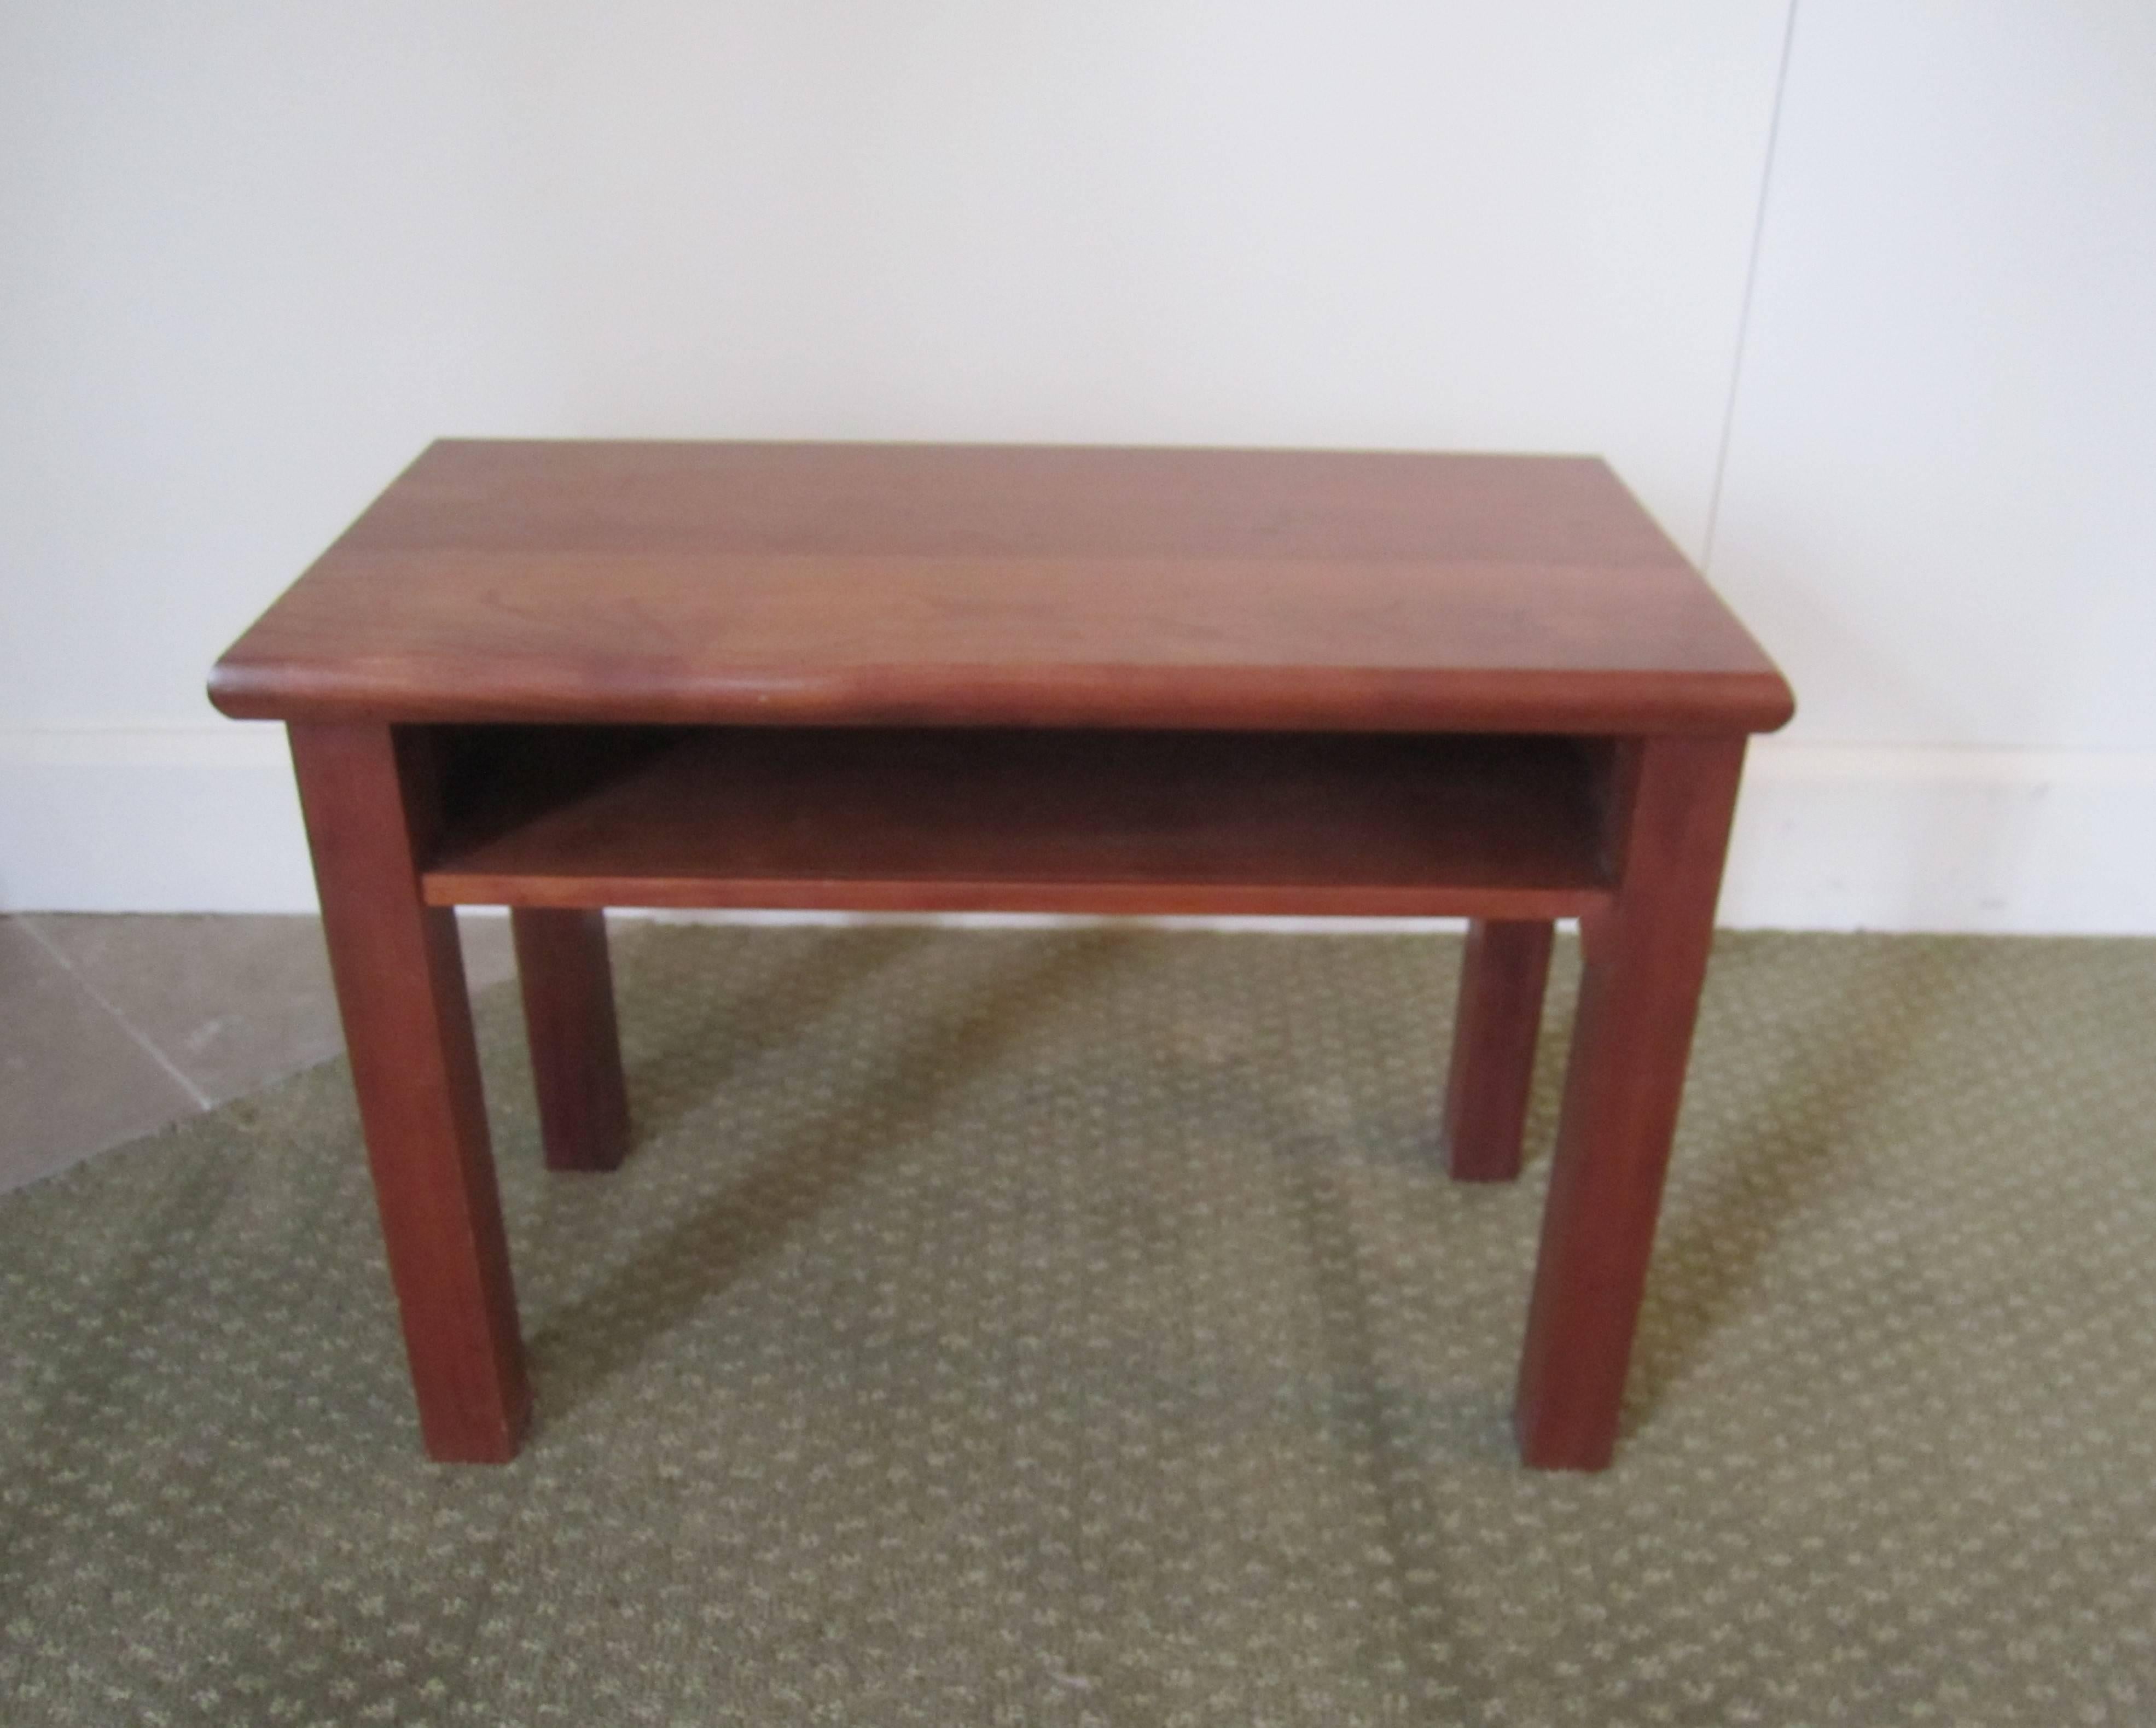 A small rectangular vintage wood end or side table with shelf. Convenient size with a shelf that may hold a book, magazine, etc. 